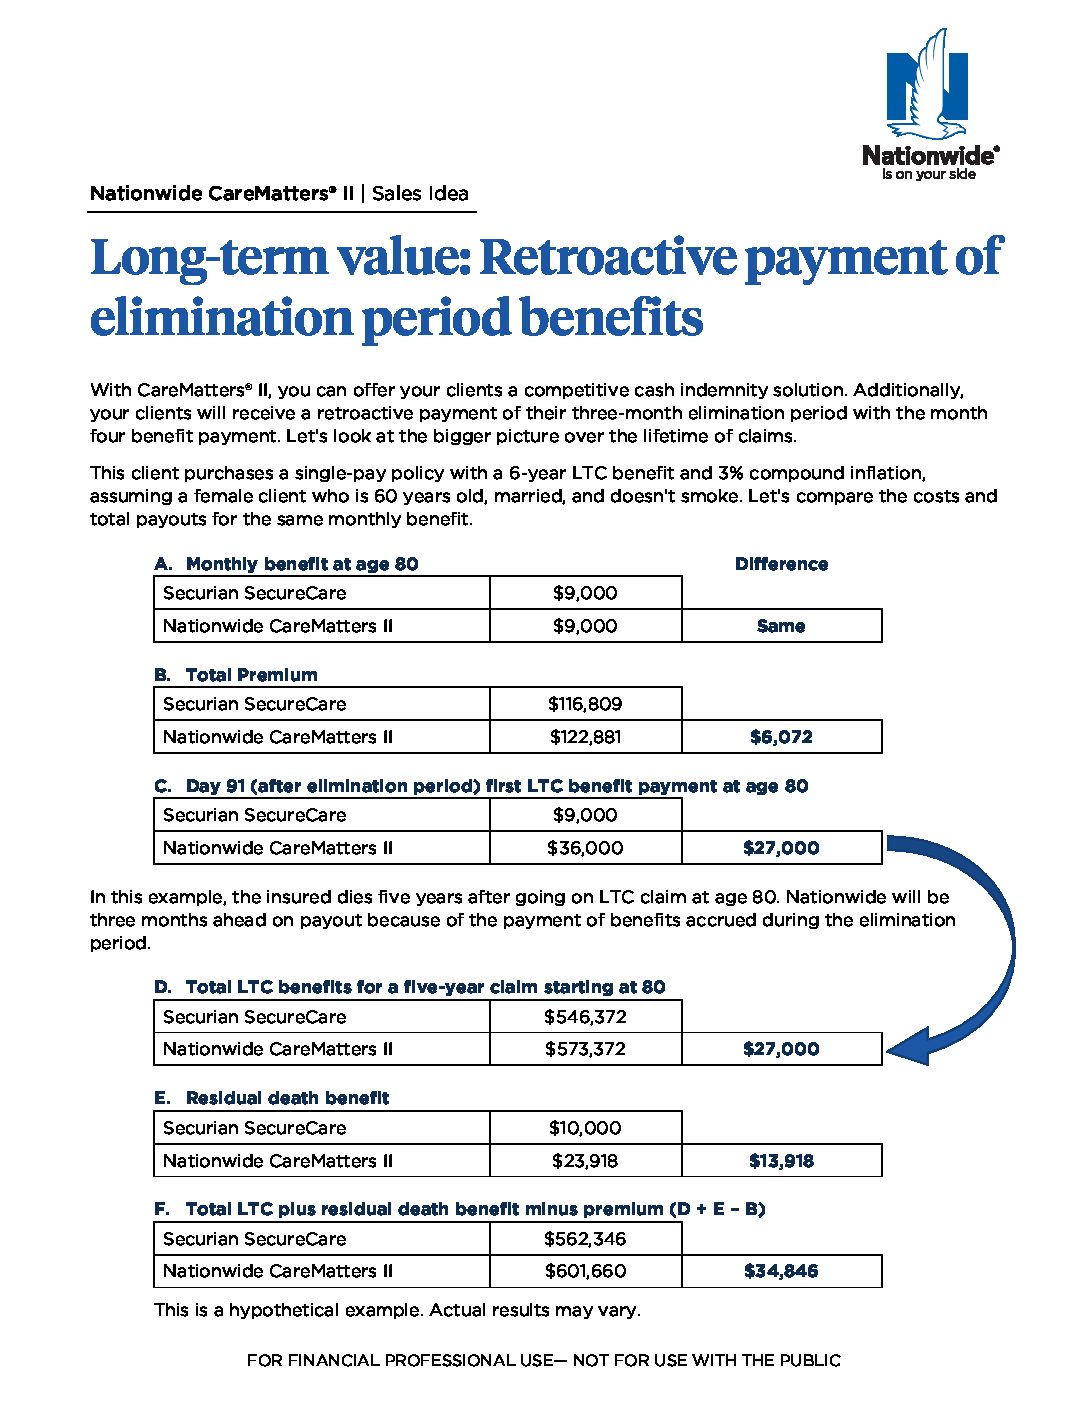 Retroactive Payment of Elimination Period Benefits